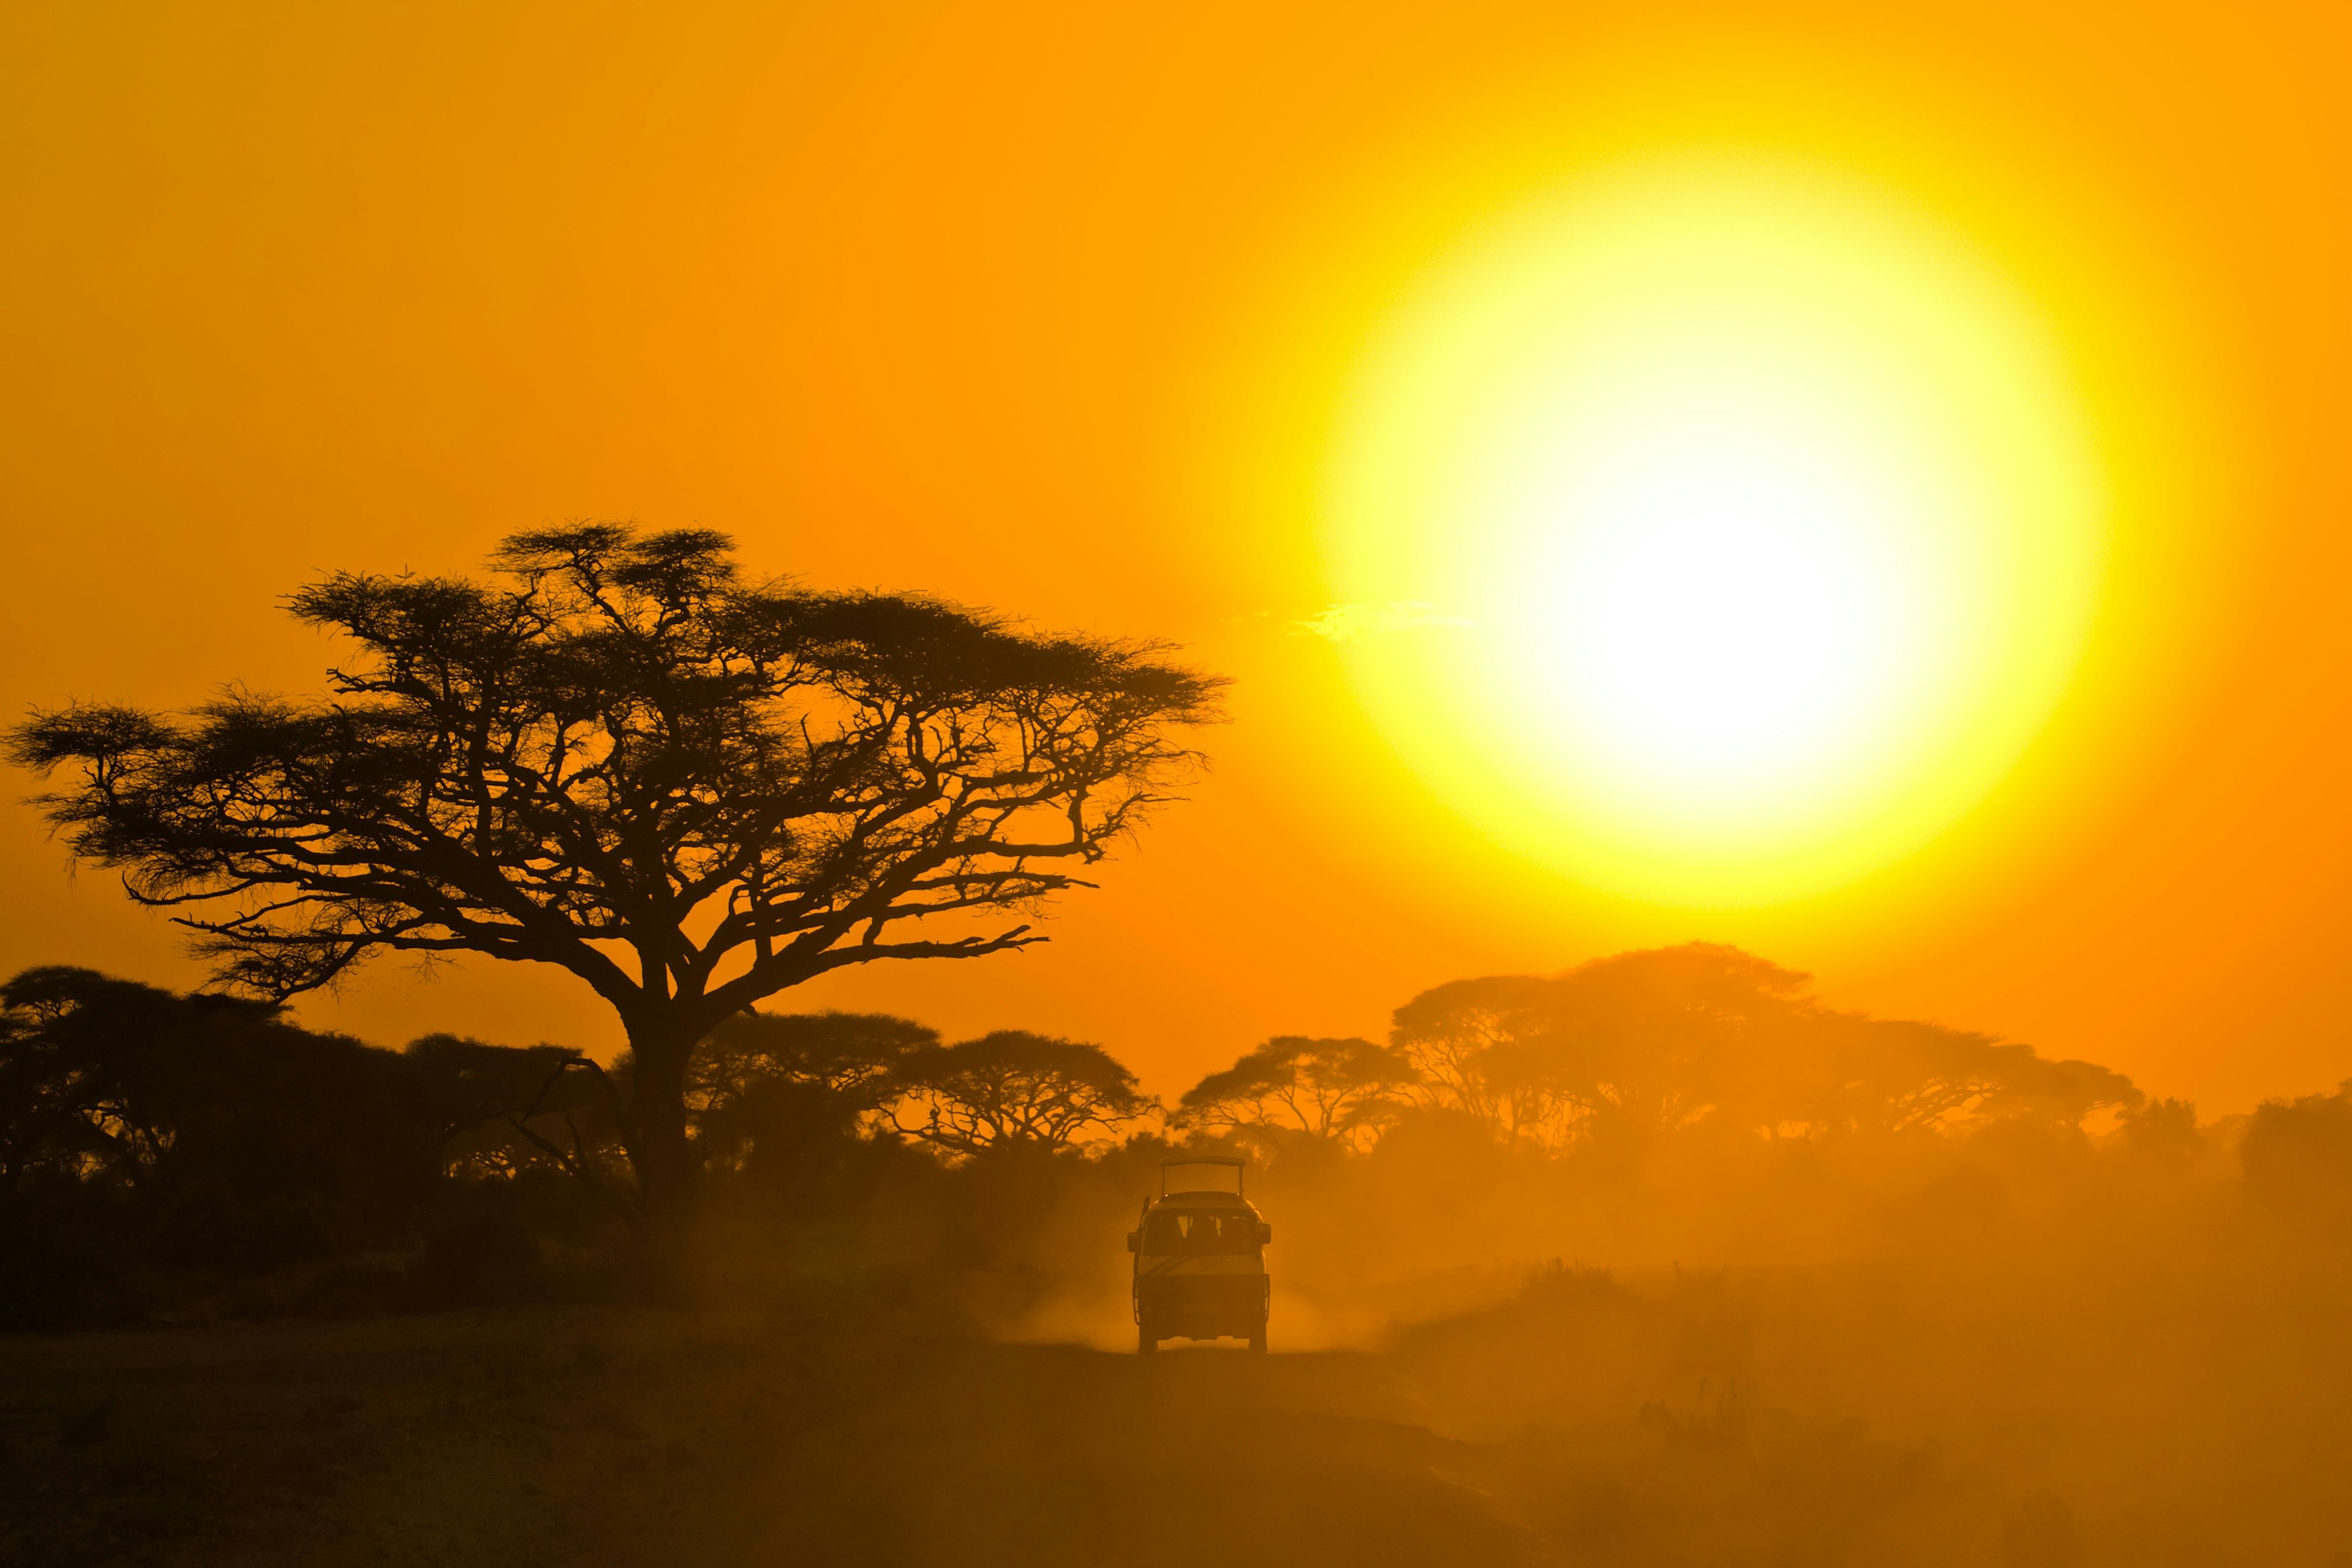 Chinese luxury travelers are increasingly interested in experiences such as safaris, according to the results of a new survey. (<a href="http://www.shutterstock.com">Shutterstock</a>)